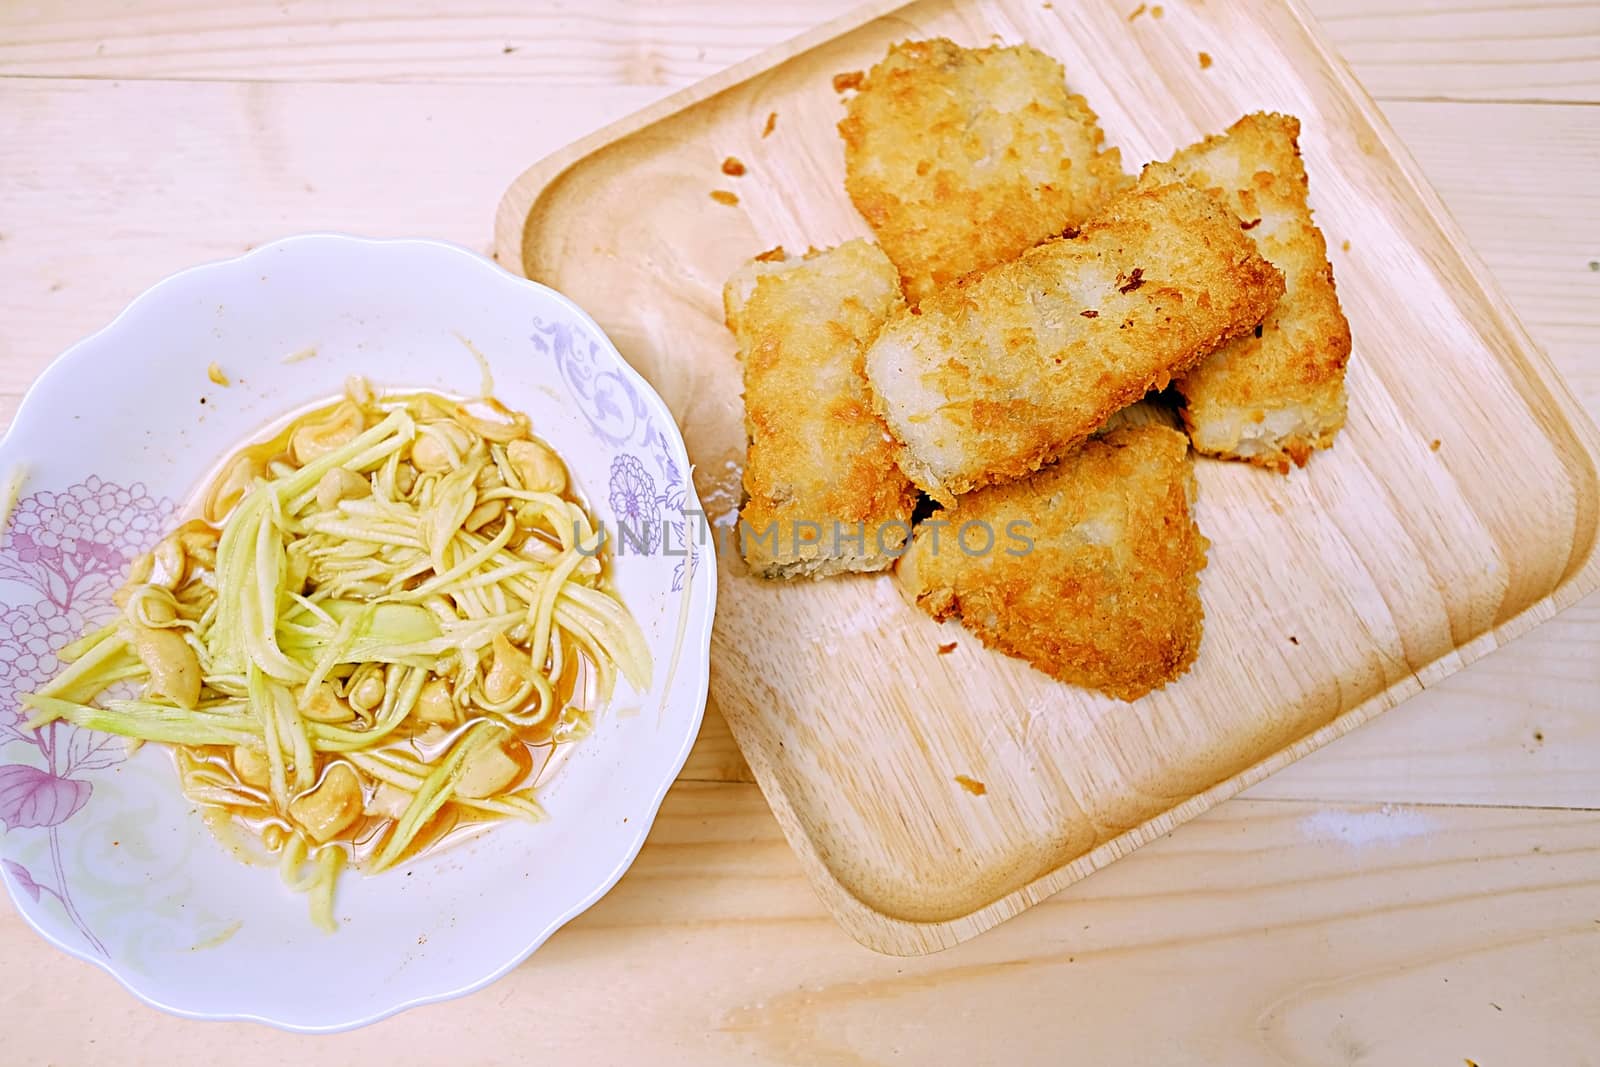 Fish Fried with Spicy Mango Salad by aonip